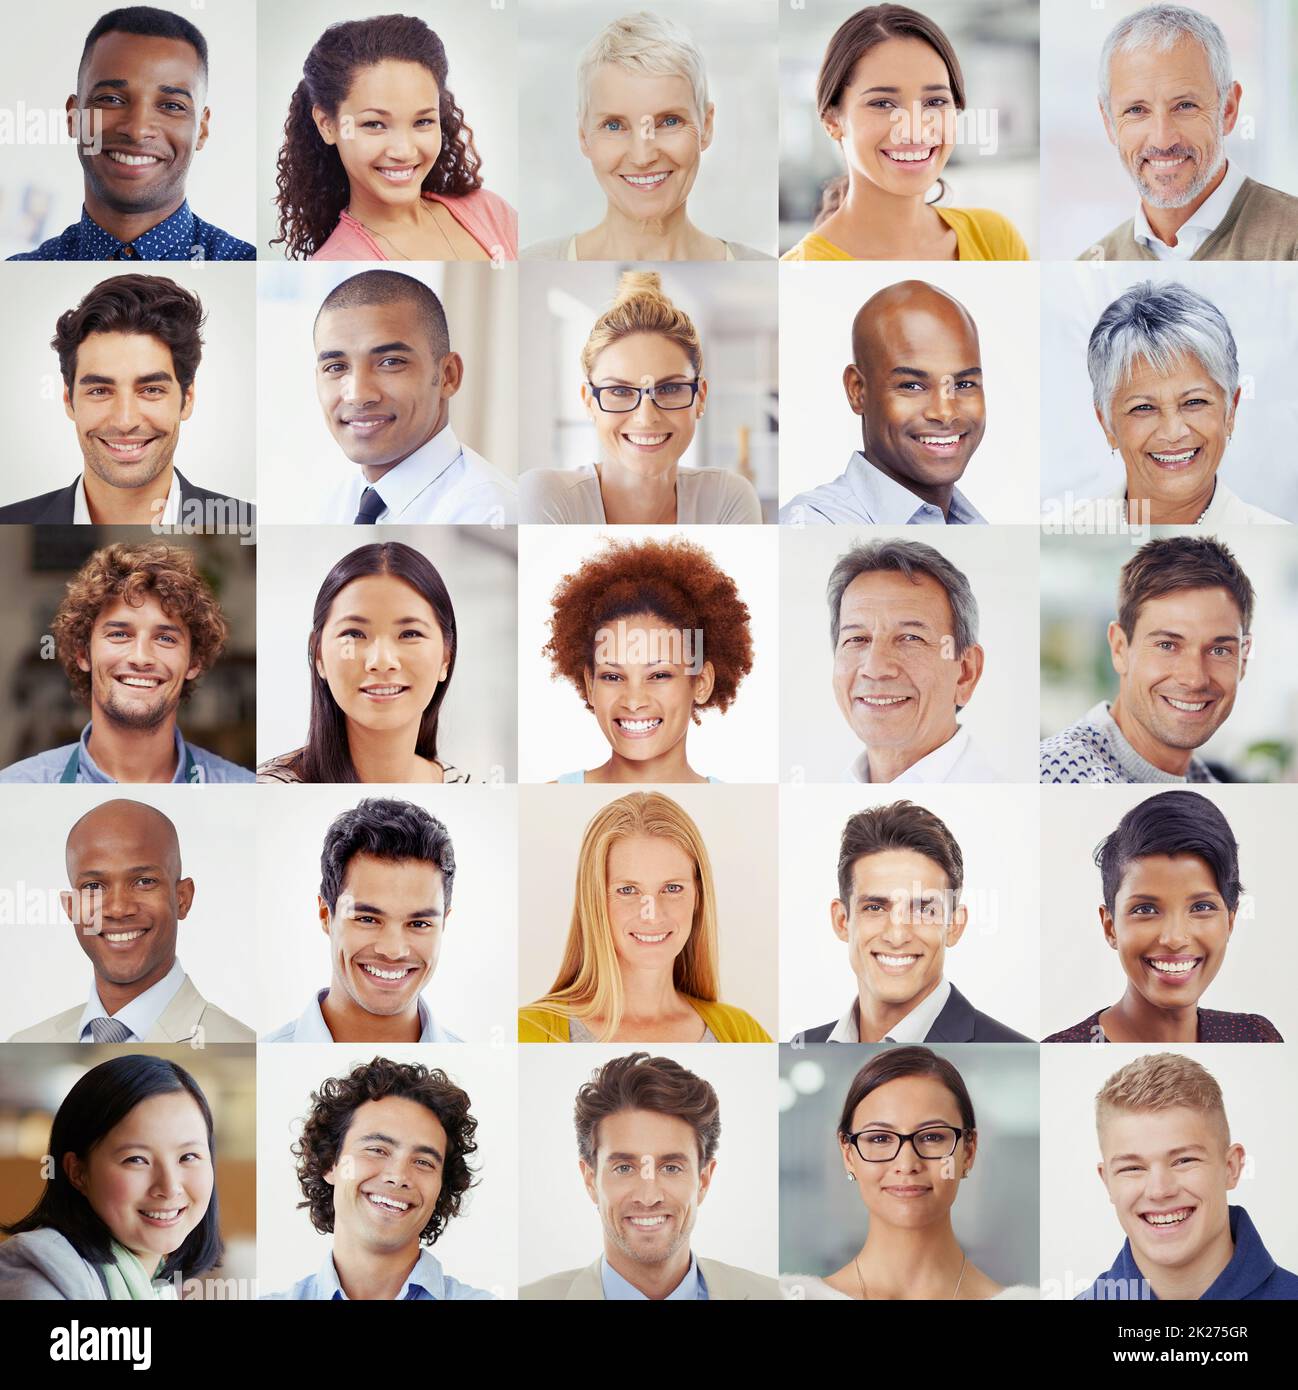 We believe in a better future. A cropped shot of people from different countries smiling together in a multitude of portraits. Stock Photo